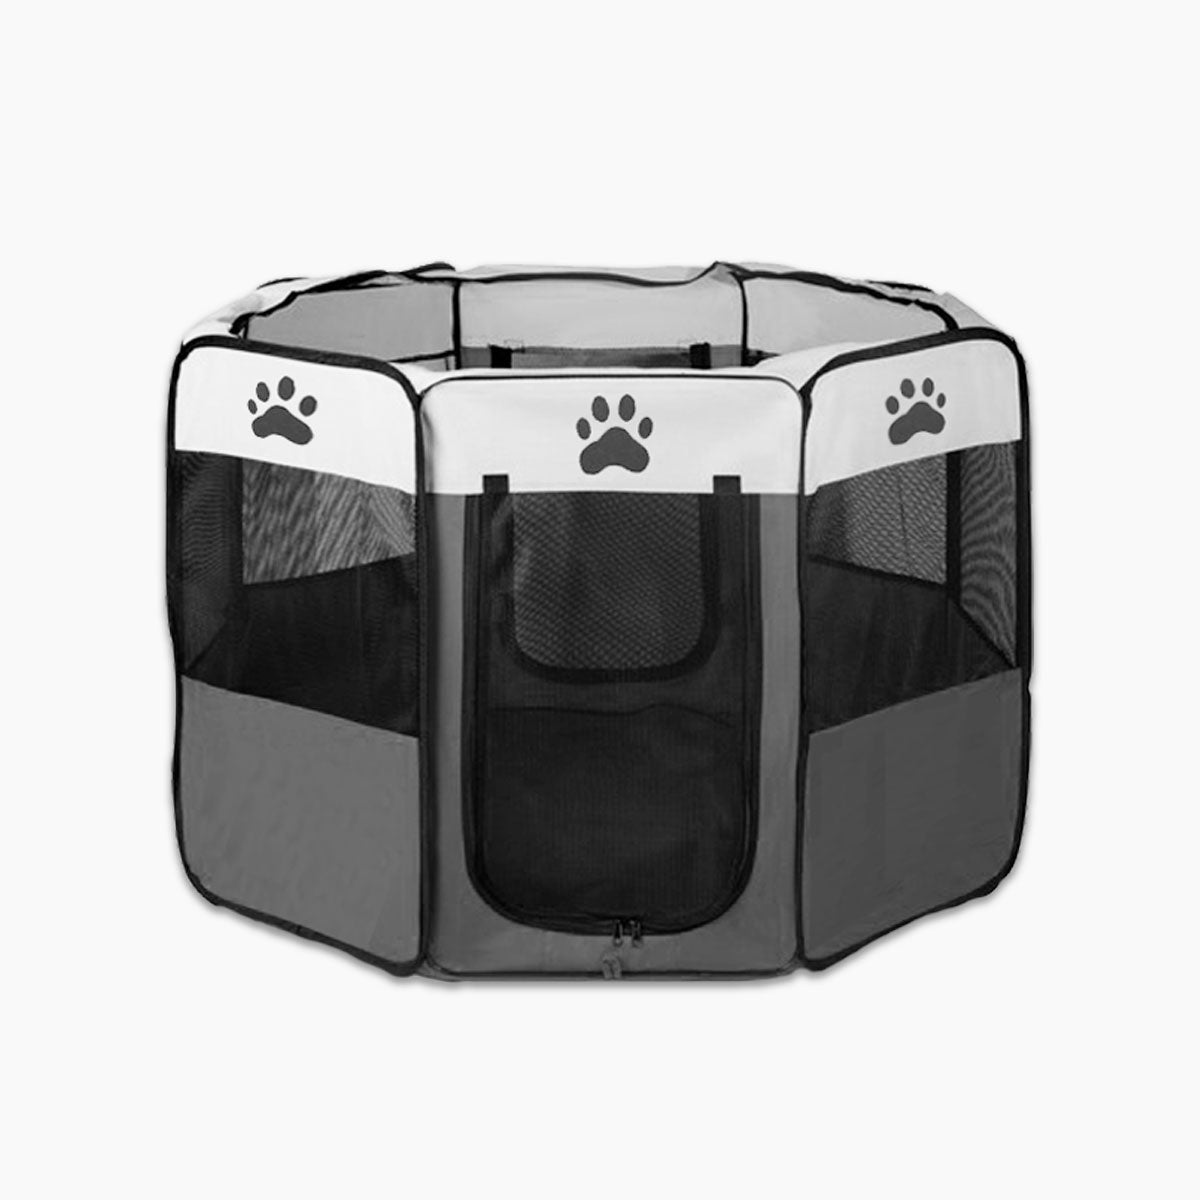 8 Panel Pet Dog Cat Crate Play Pen Bags Kennel Portable Tent Playpen Puppy Cage Extra Large Grey